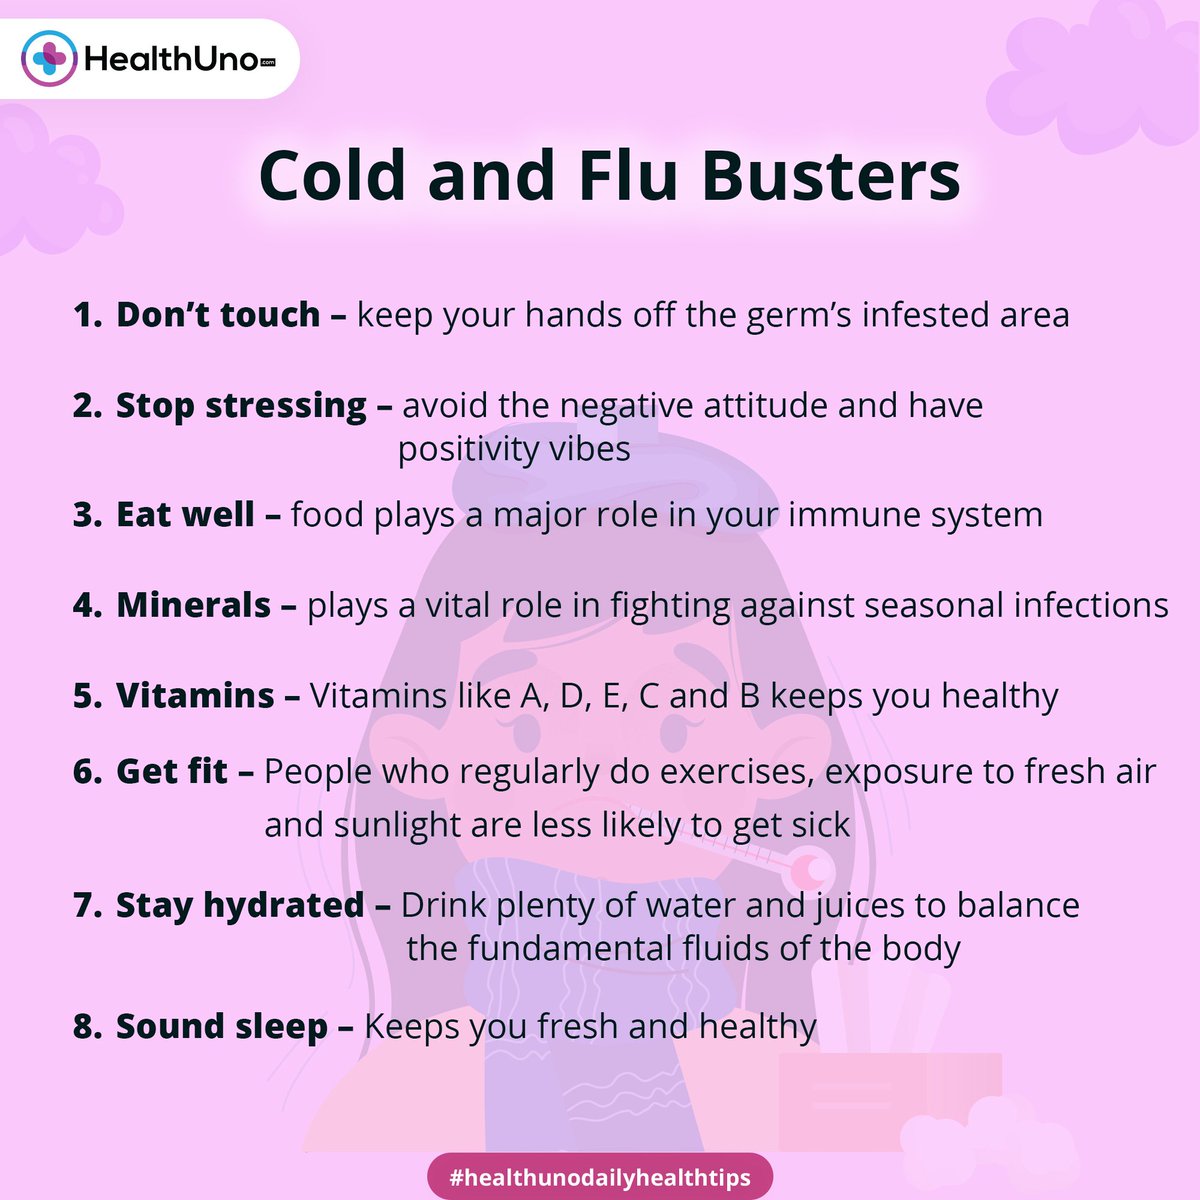 Cold and flu busters
#cold #coldissue #vitamins #flu #flubusters #eatwell #minerals #sunlight #stress #sleep  #healthunodailyhealth_tips #healthunohealthcare #health #dailytips #anti #dailyupdates #dailyhealthnews #dailyhealthtips #healthunodailyupdates #healthunodailyhealthtips